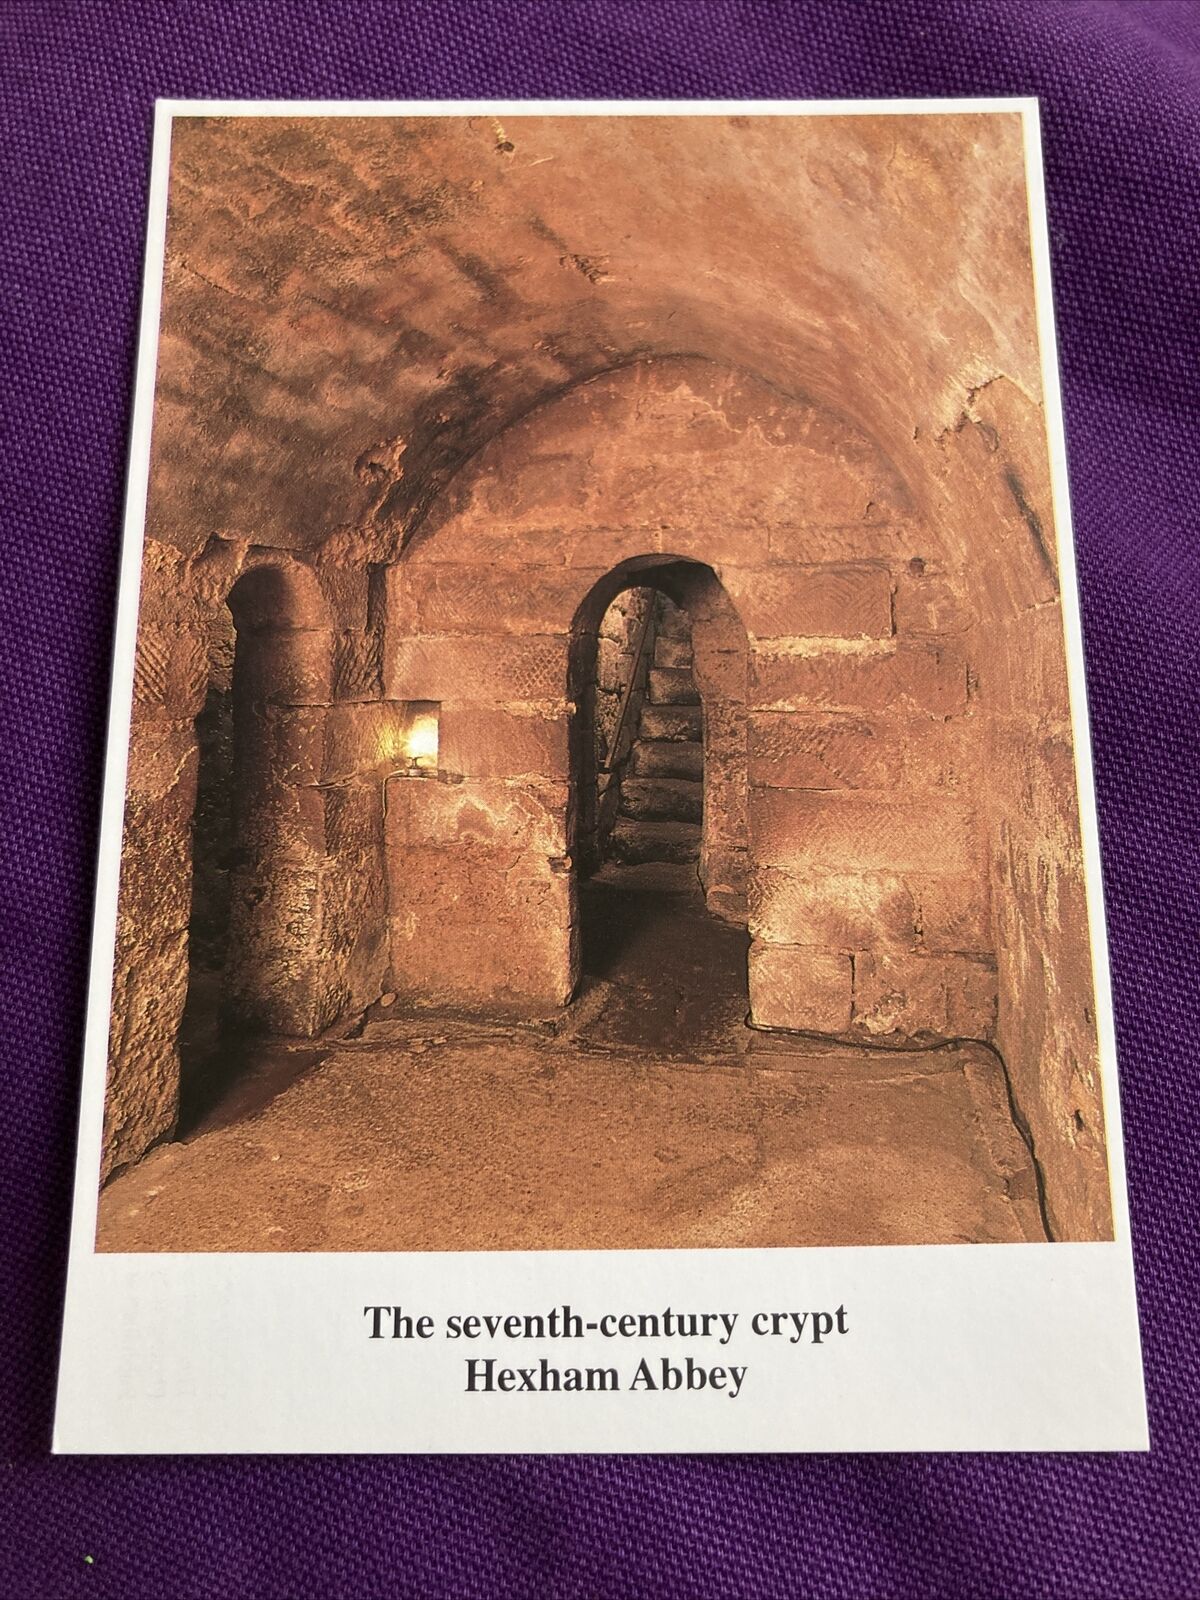 House Clearance - Hexham Abbey The Seventh-Century Crypt Service